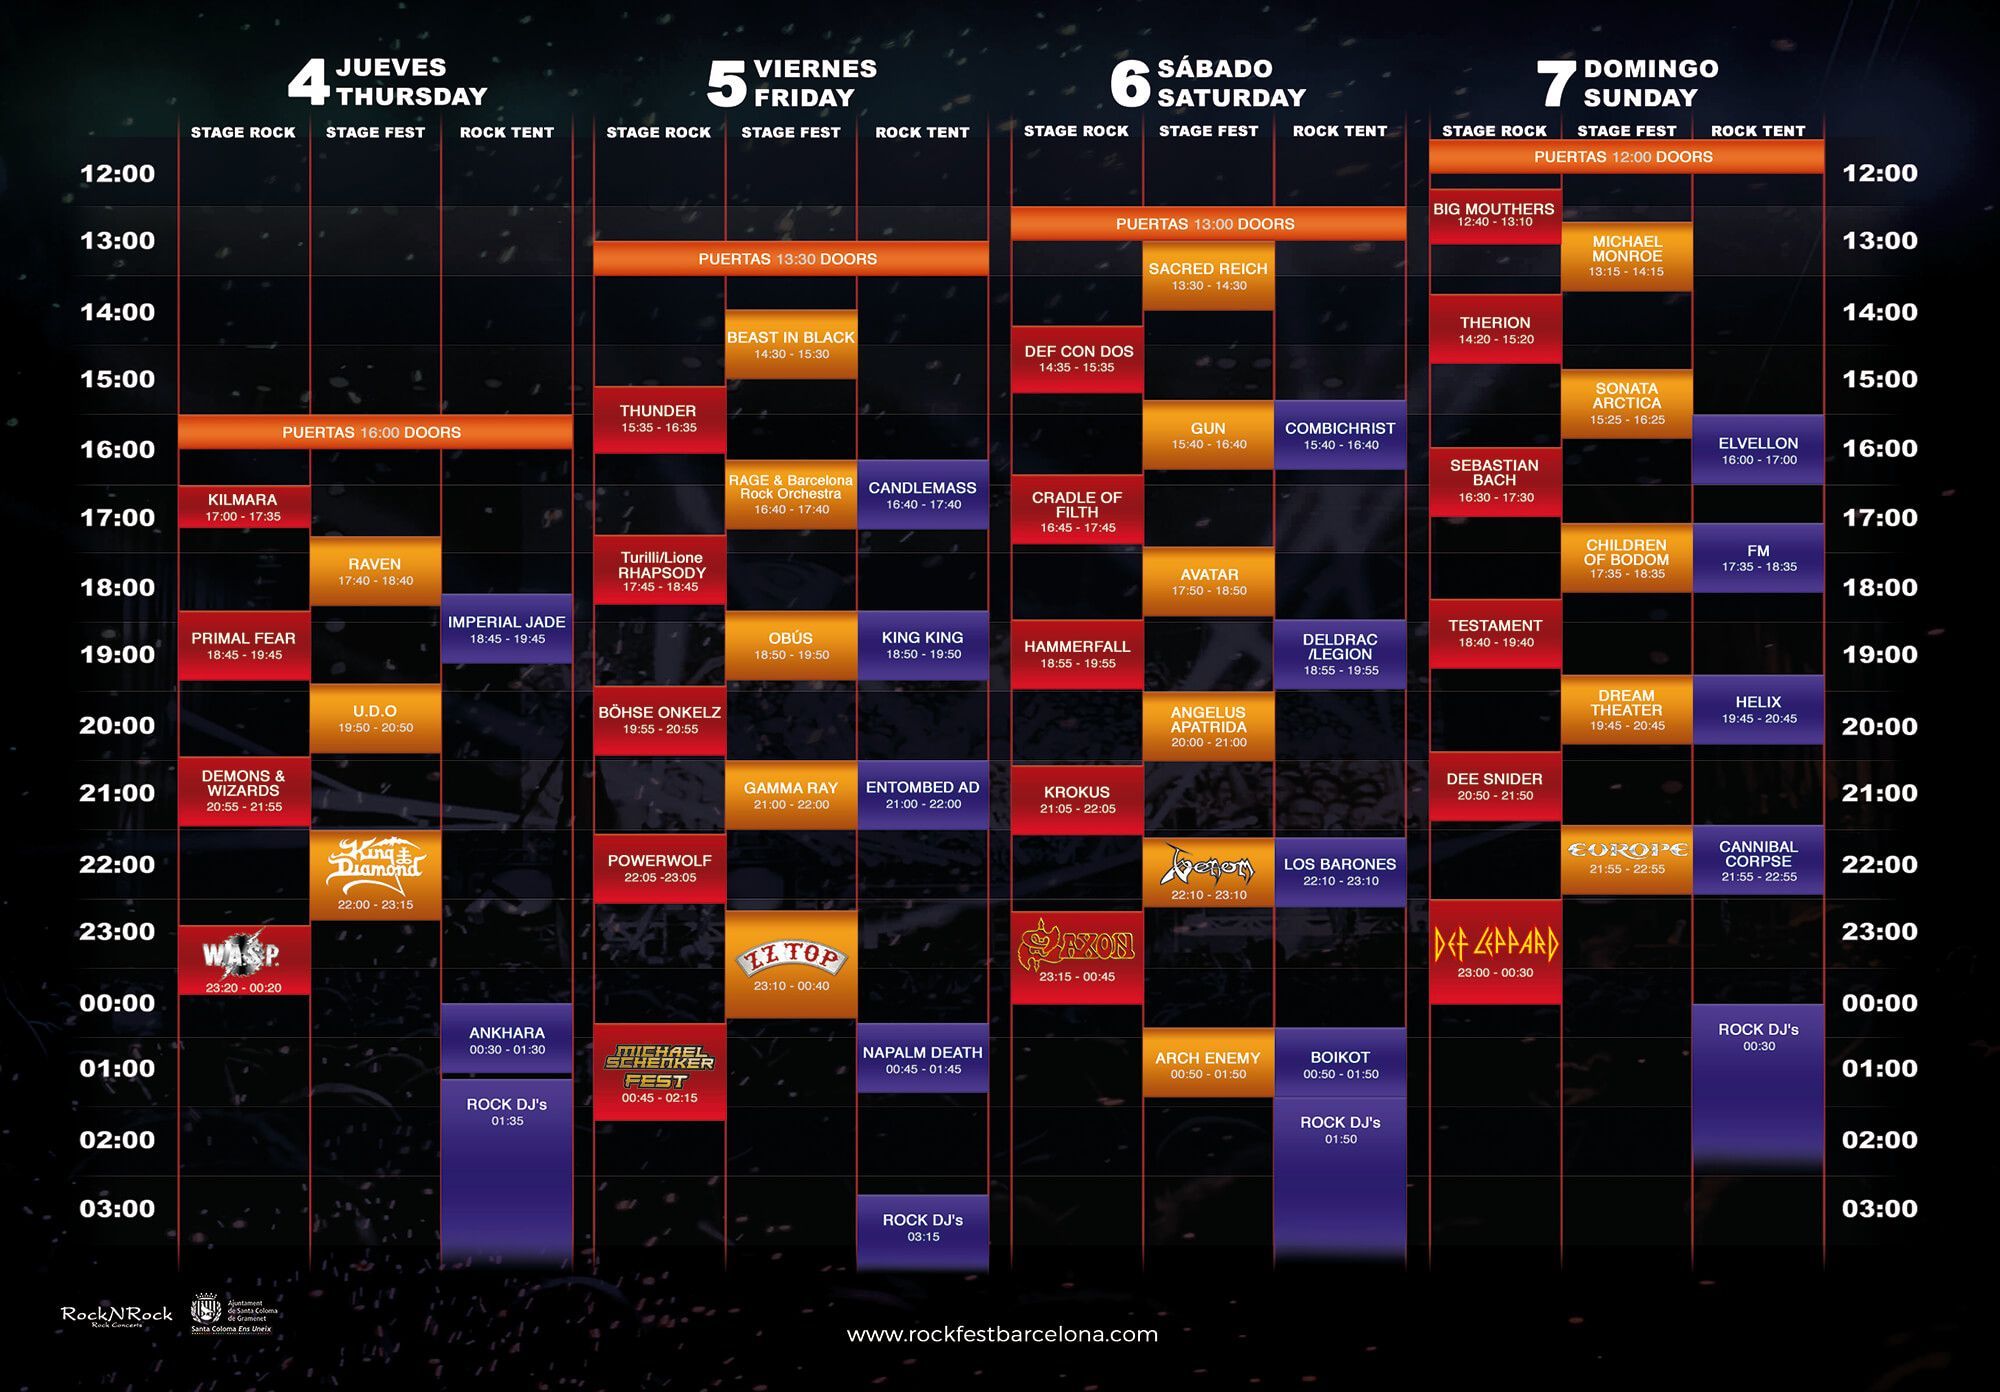 Horarios rock fest 2019 - rock and blog